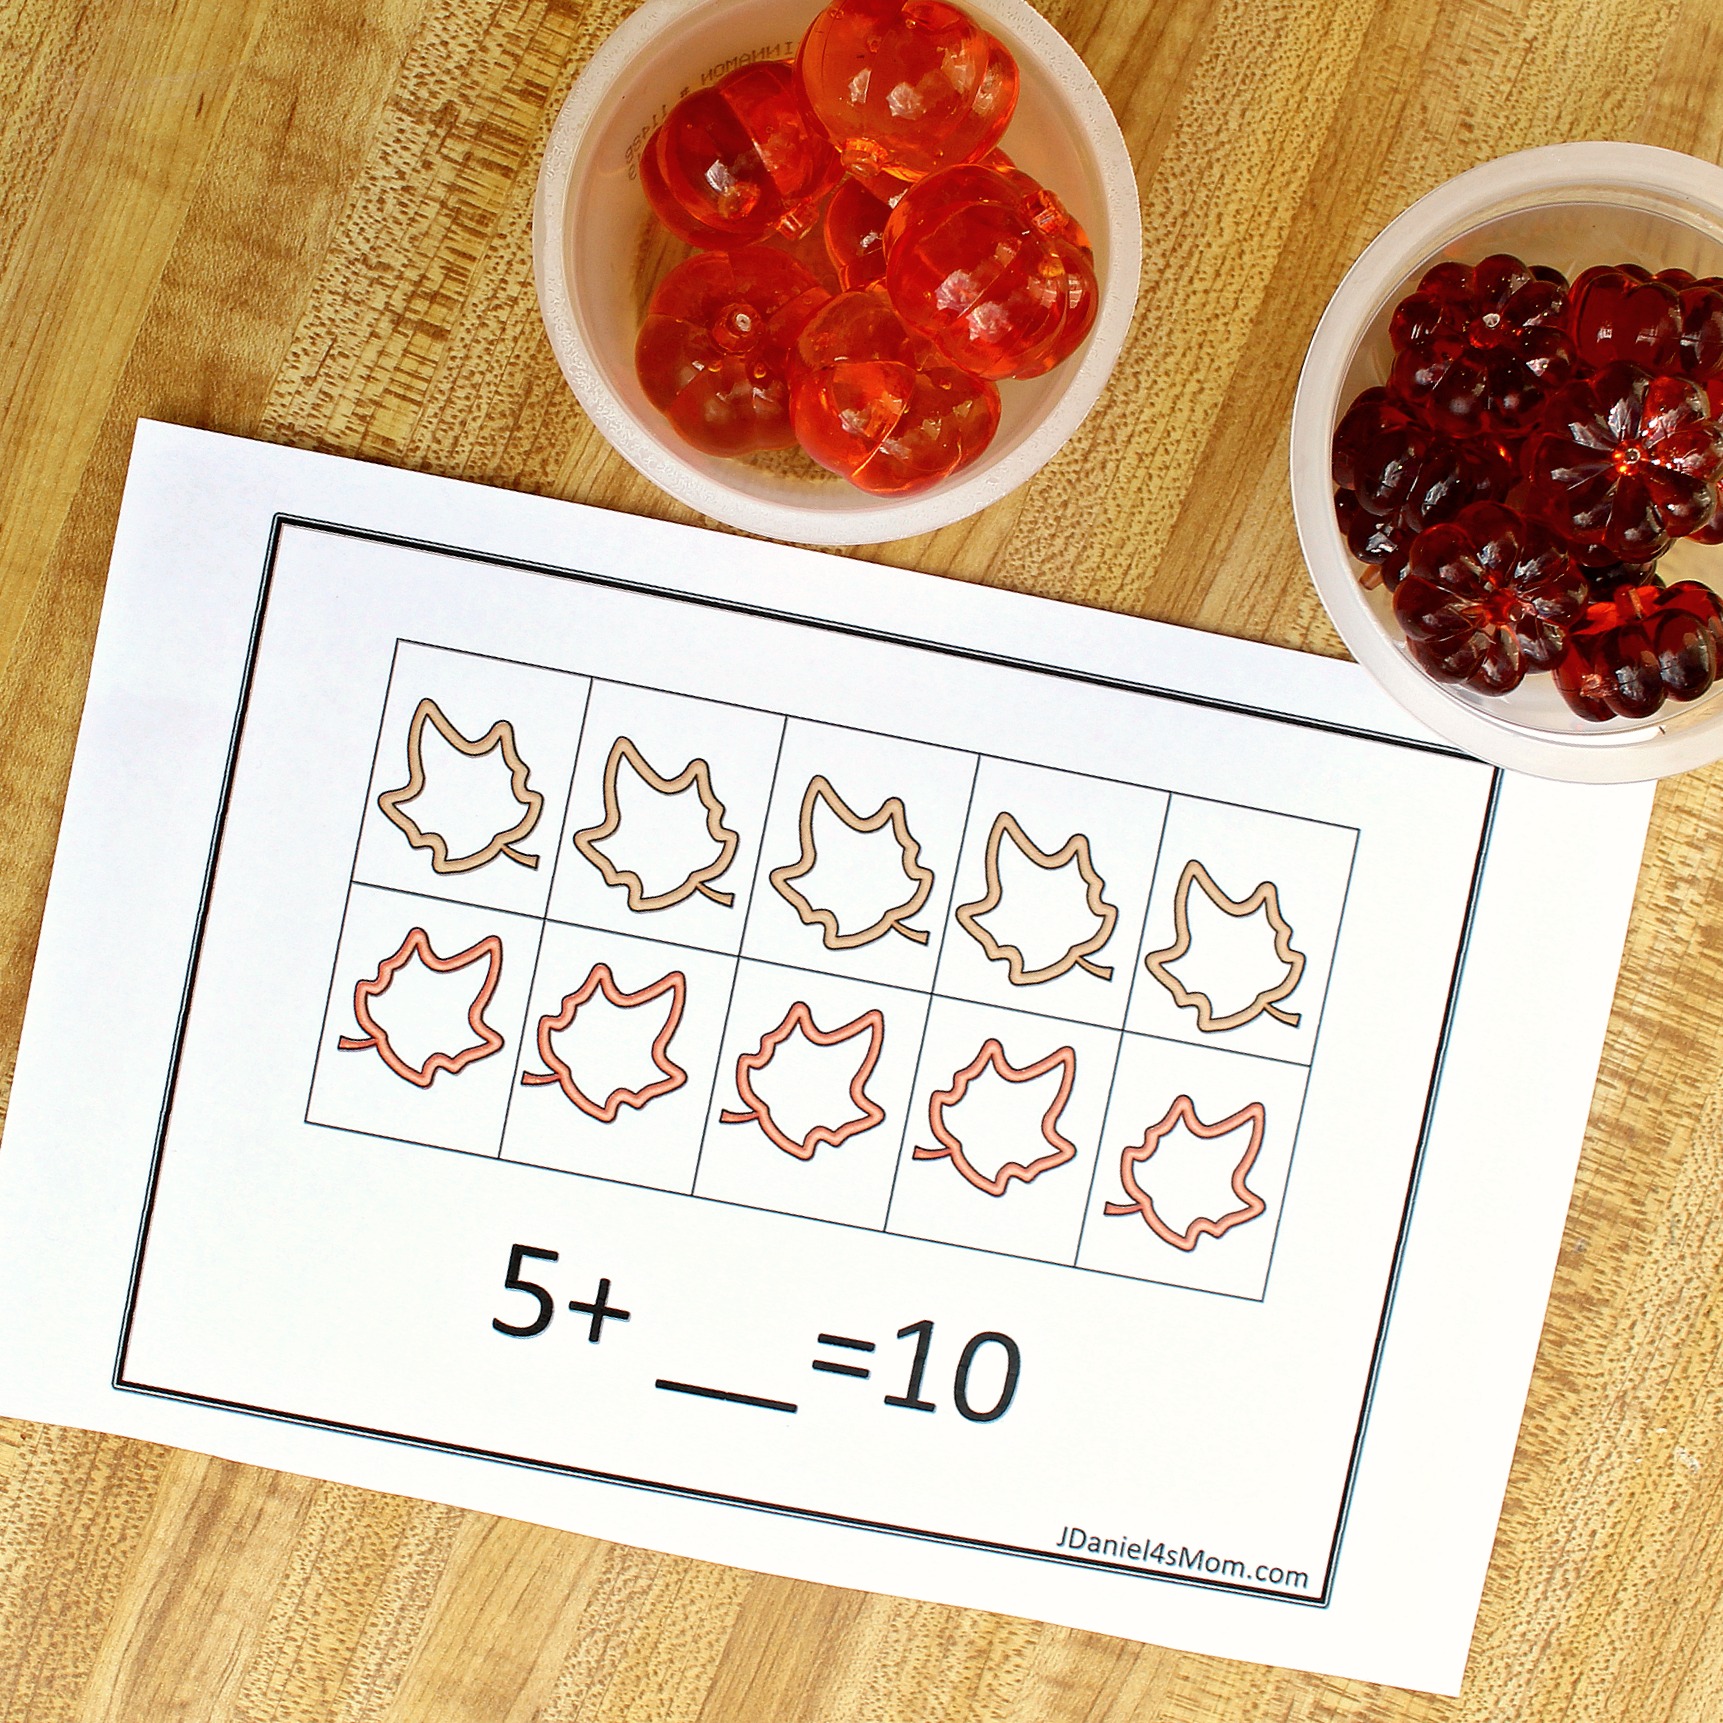 Fall-Themed Free Ten Frame Addition Worksheets - Ready to Add Five Plus Five